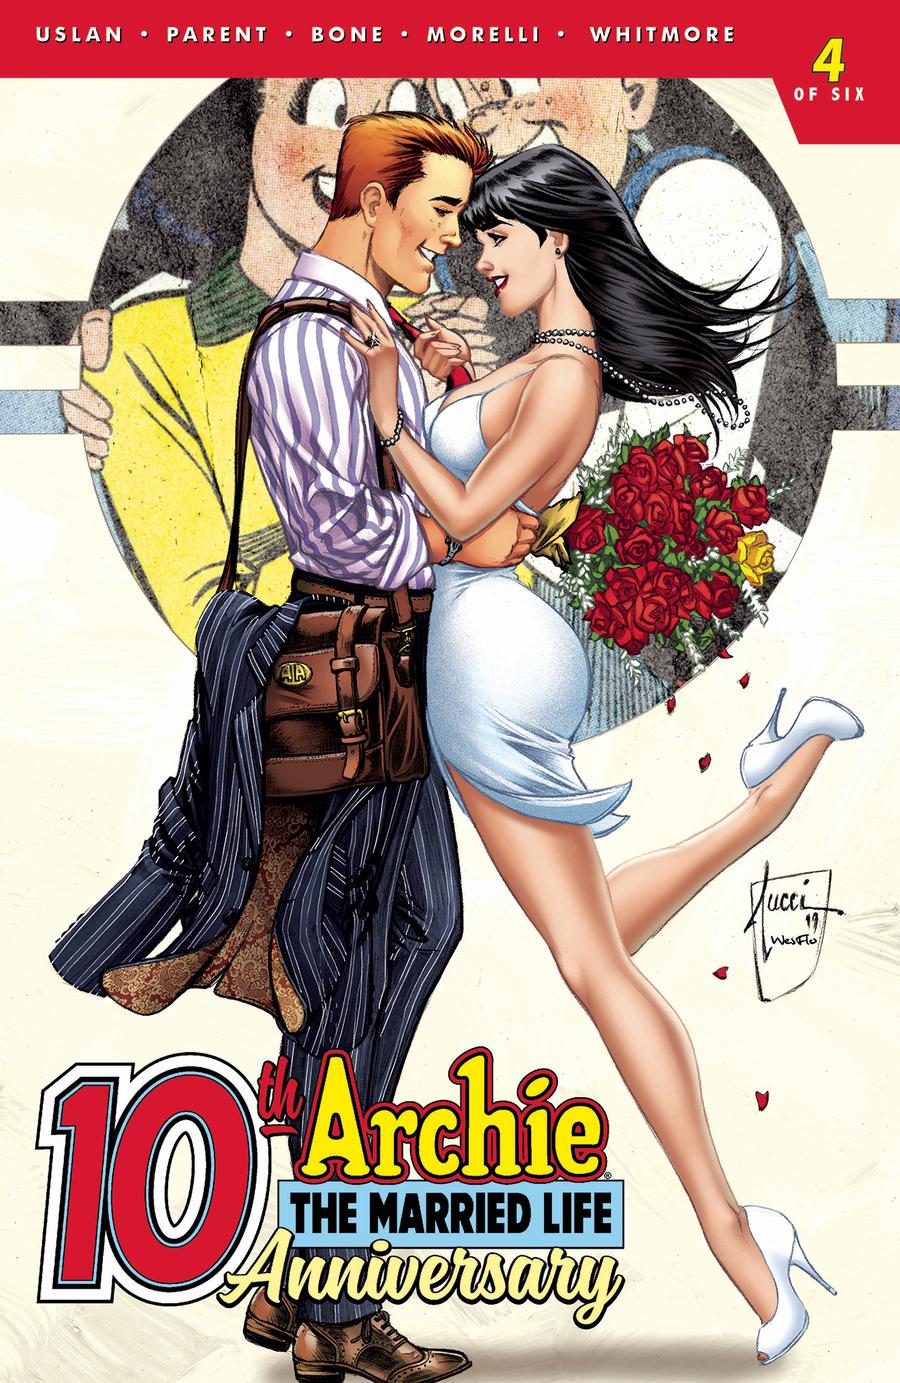 Archie The Married Life 10th Anniversary #4 Cover C Variant Billy Tucci & Wes Hartman Cover